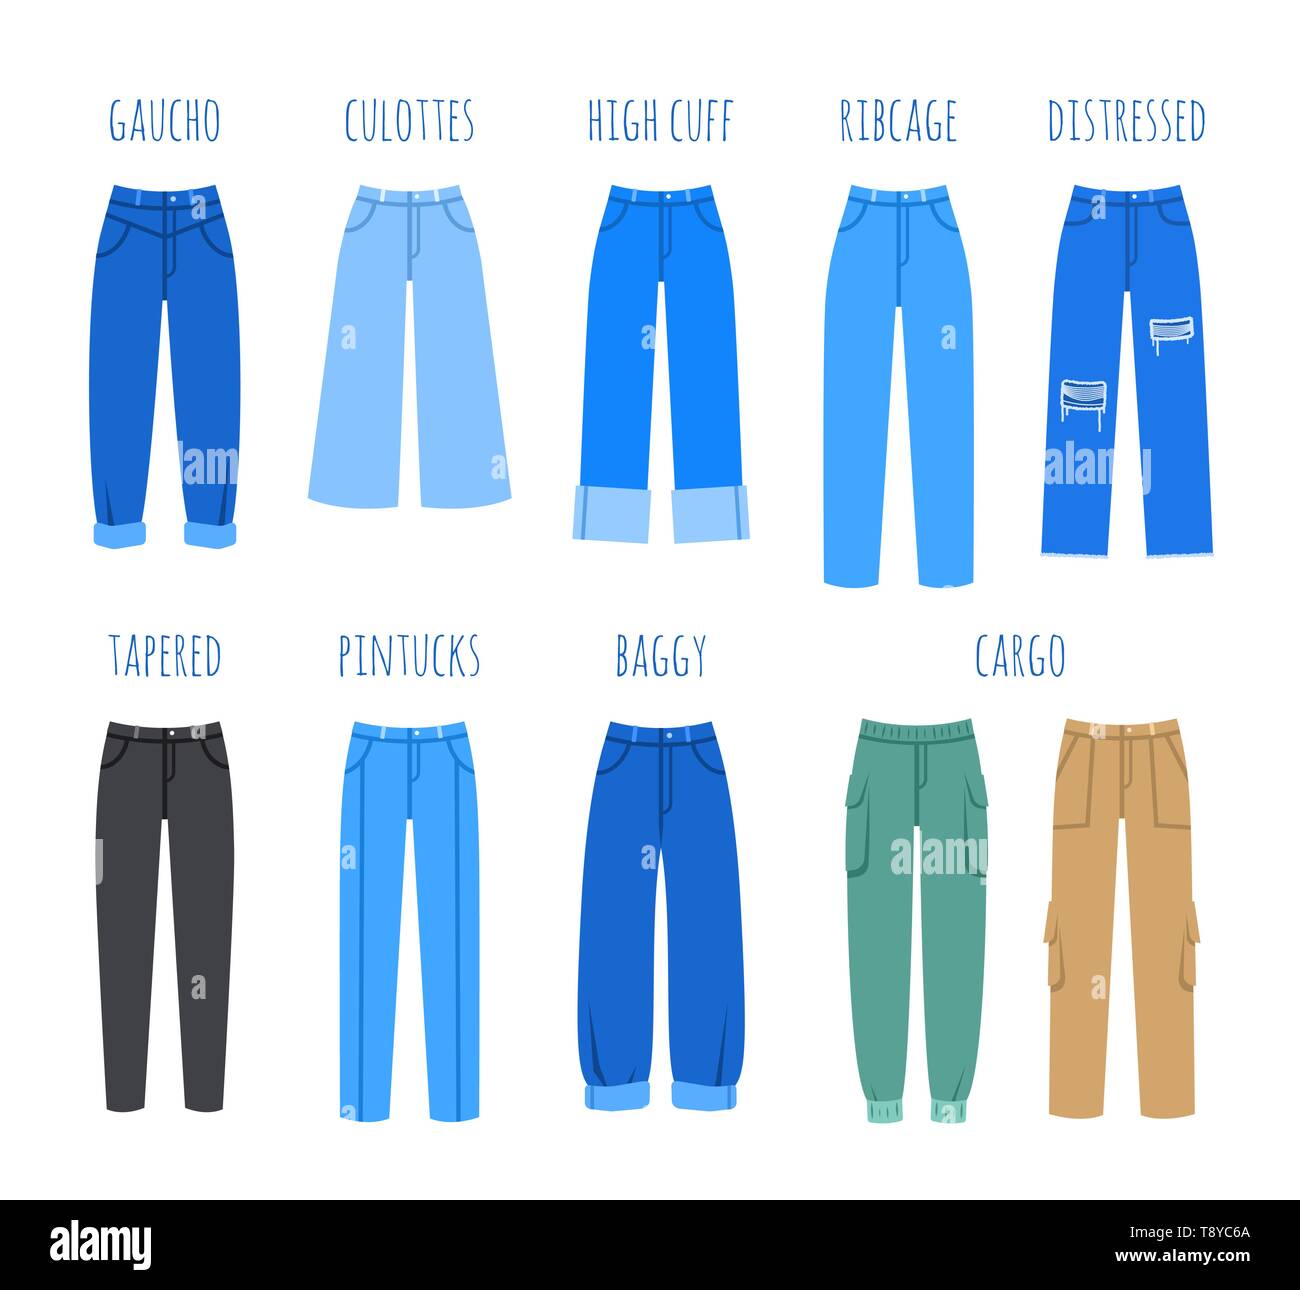 Different Types of Pants in Fashion  The Creative Curator